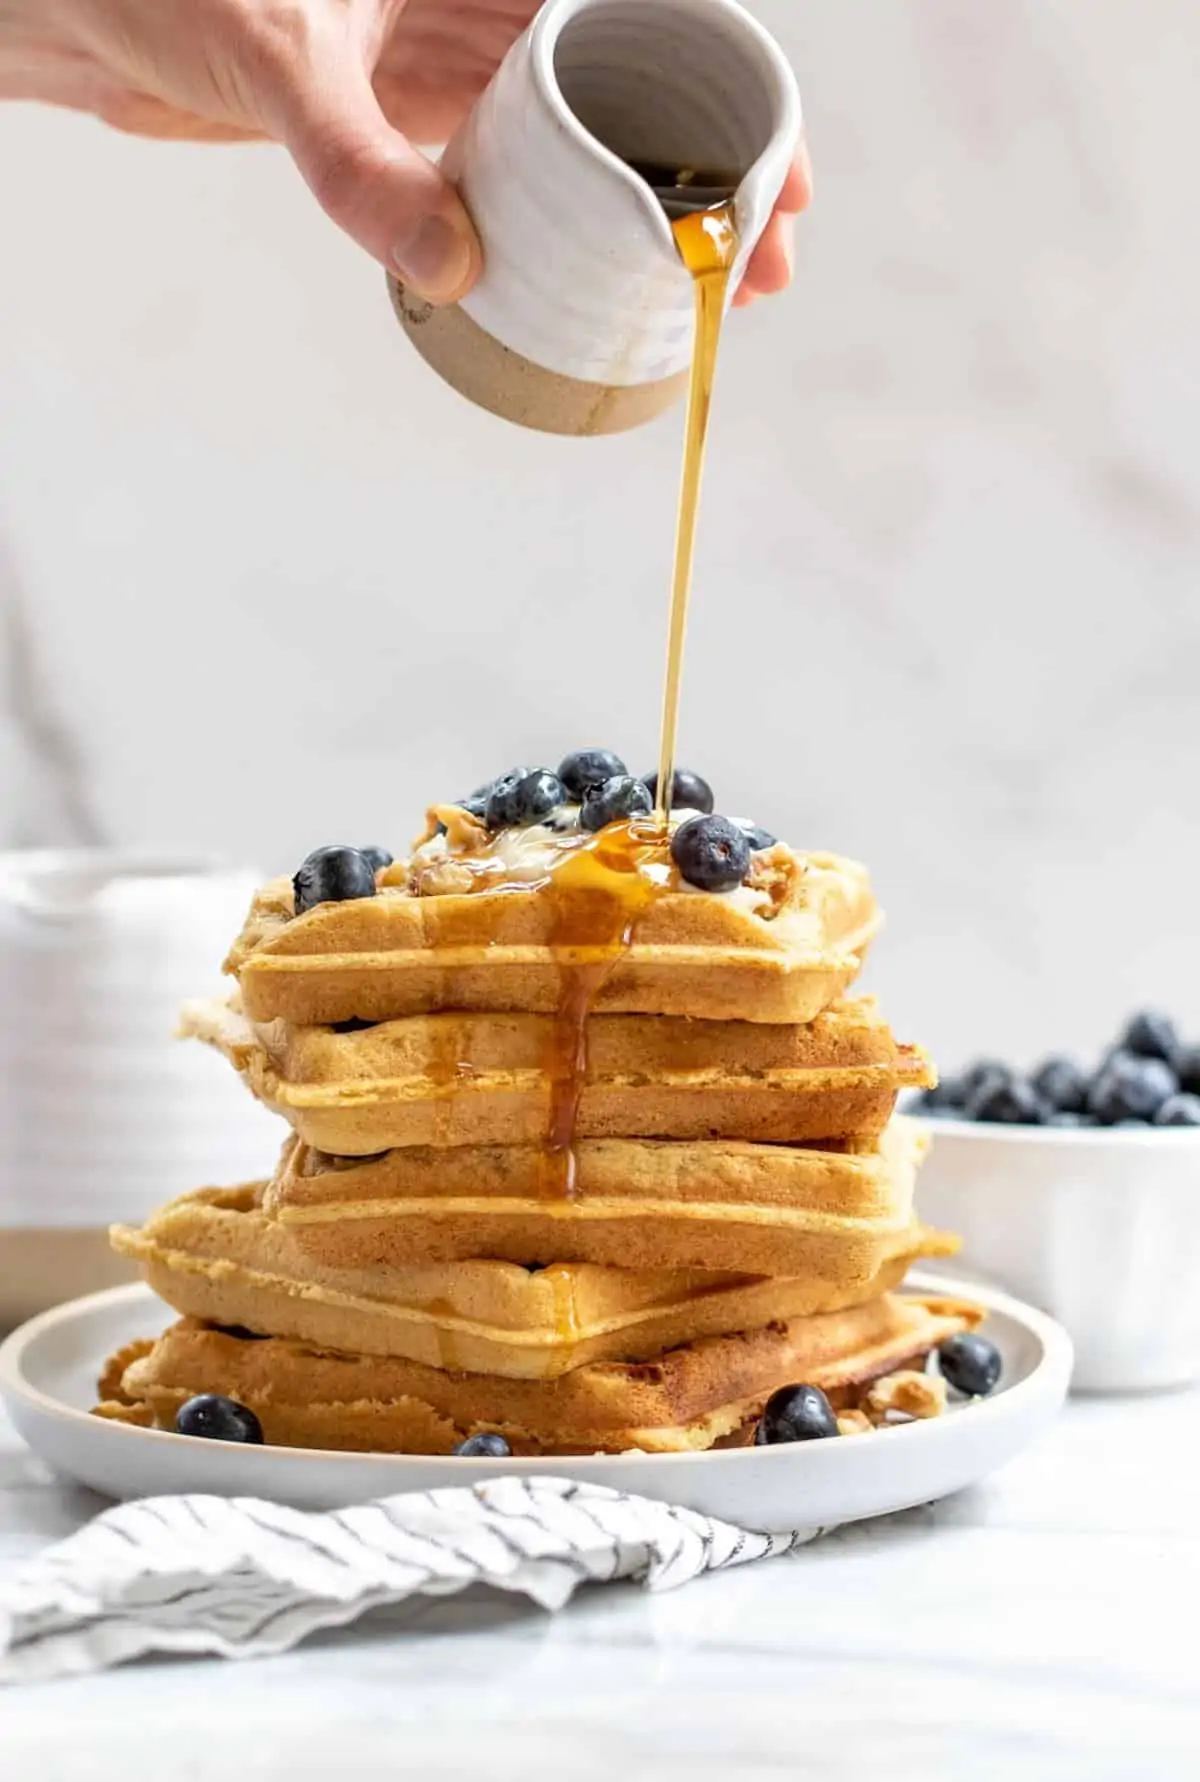 Pouring maple syrup on a stack of waffles.